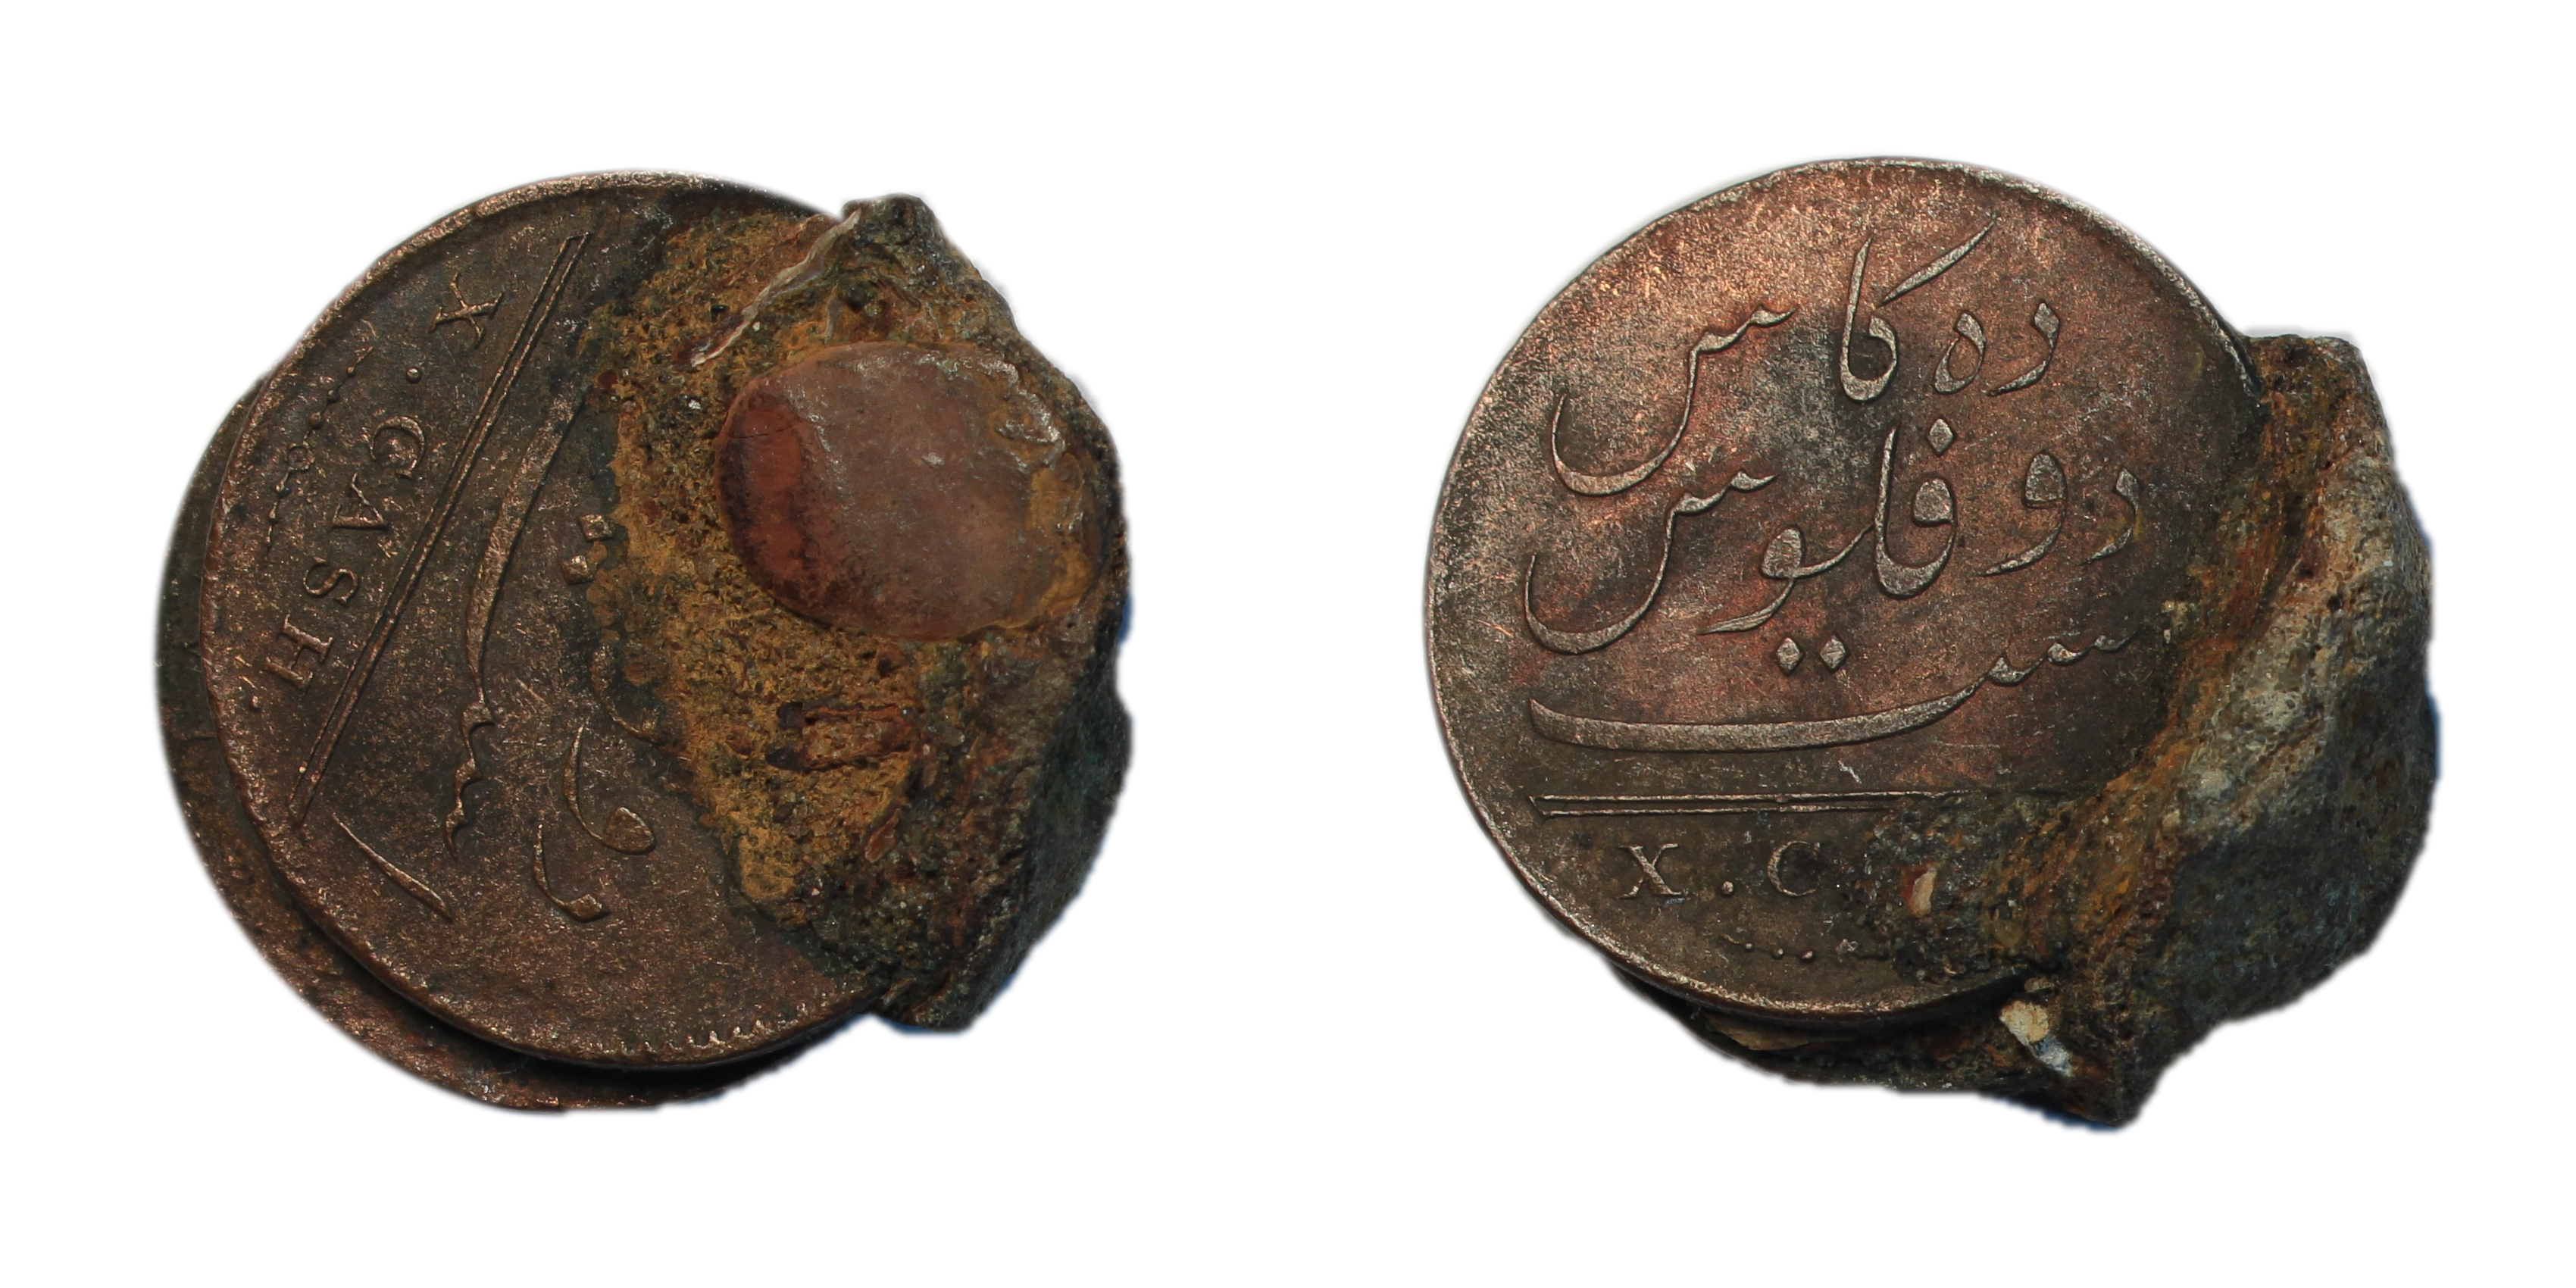 Shipwreck Coins related to the East India Company, two coin clump of 10 cash, 1808. Partially